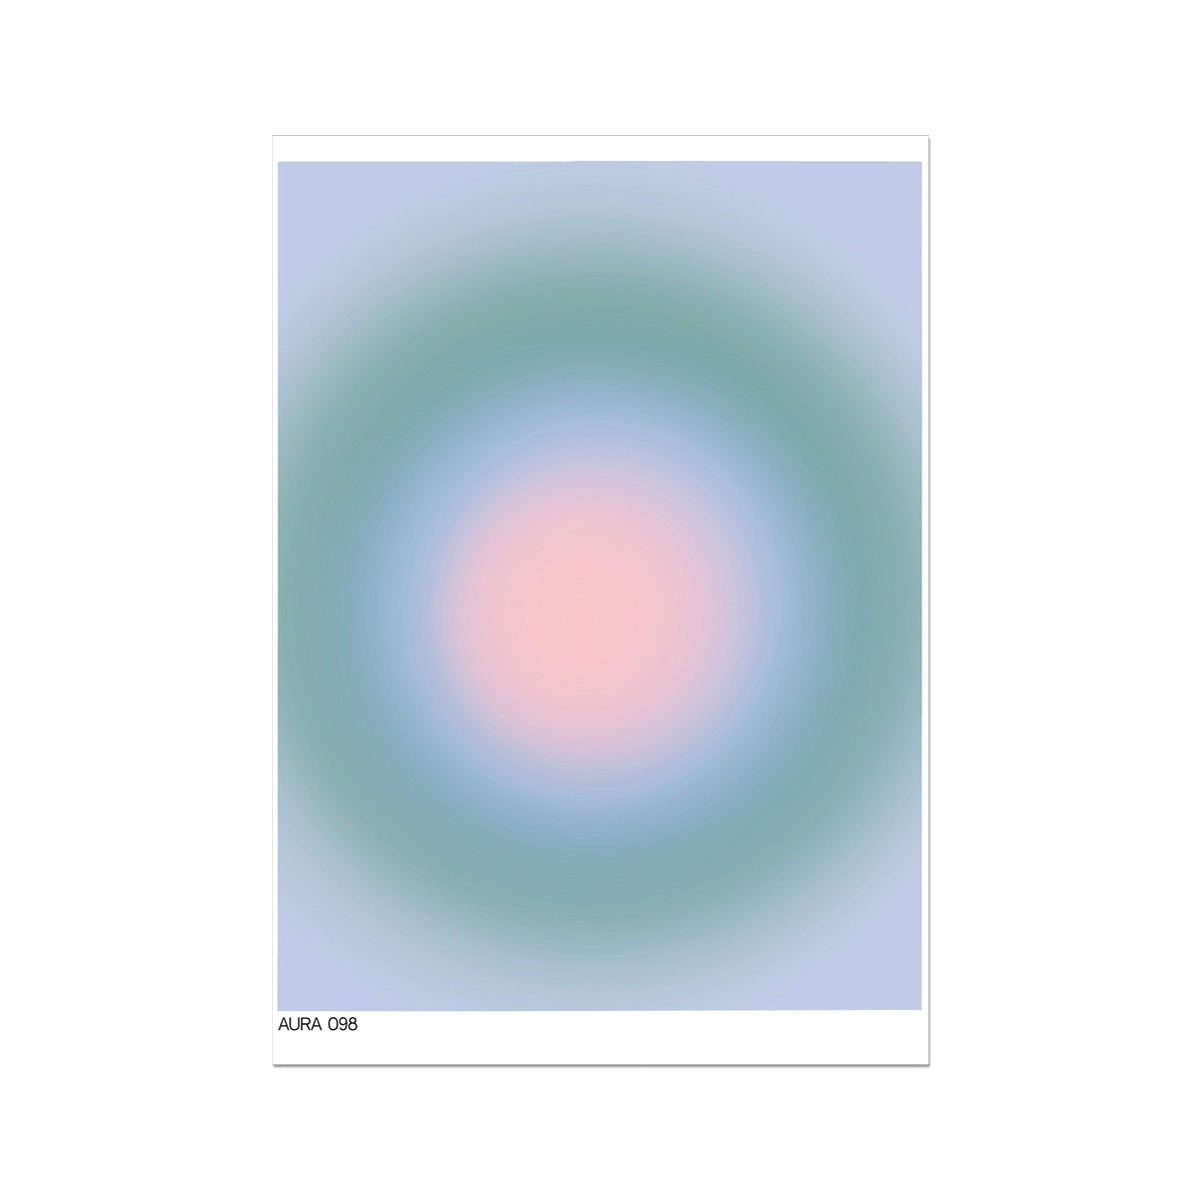 © les muses / One of a hundred dreamy pastel auras in a collection of aesthetic gradient wall art prints. The aura collection features an endless array of colorful and vibrant abstract gradients perfect for those looking for a wide selection of original prints and posters.